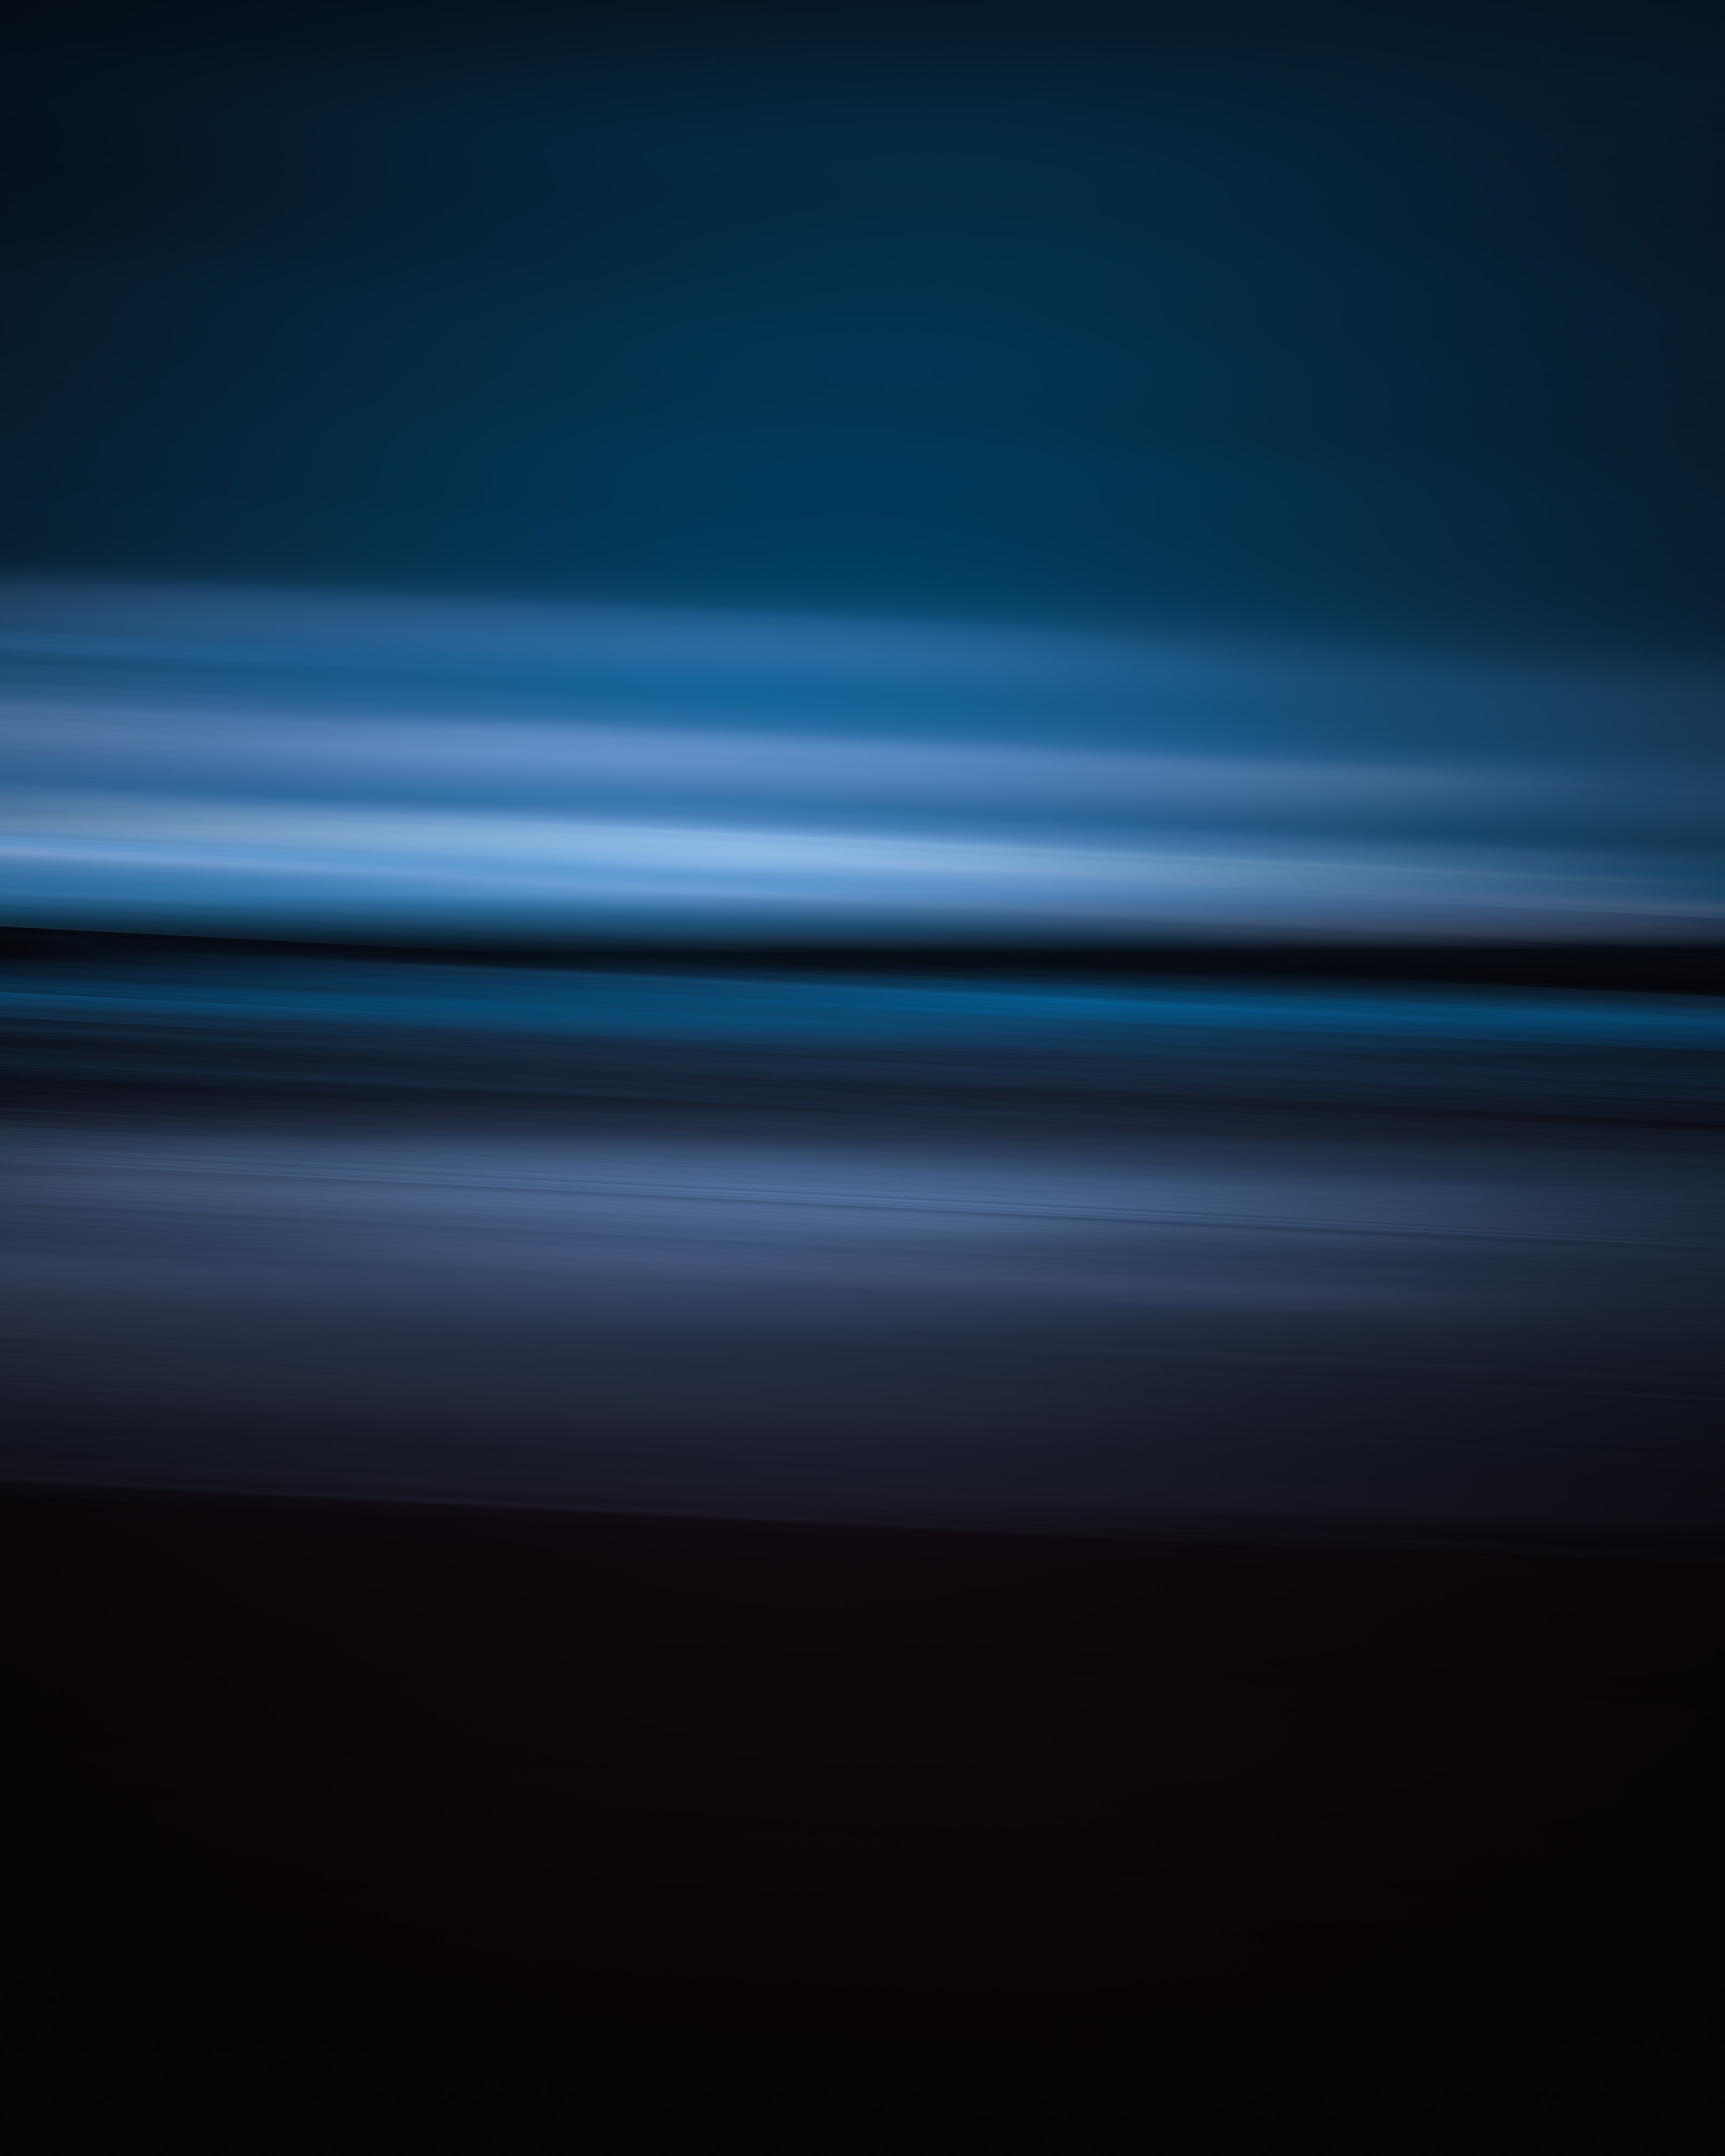 blur, stripes, blue, abstract, streaks, smooth, distortion